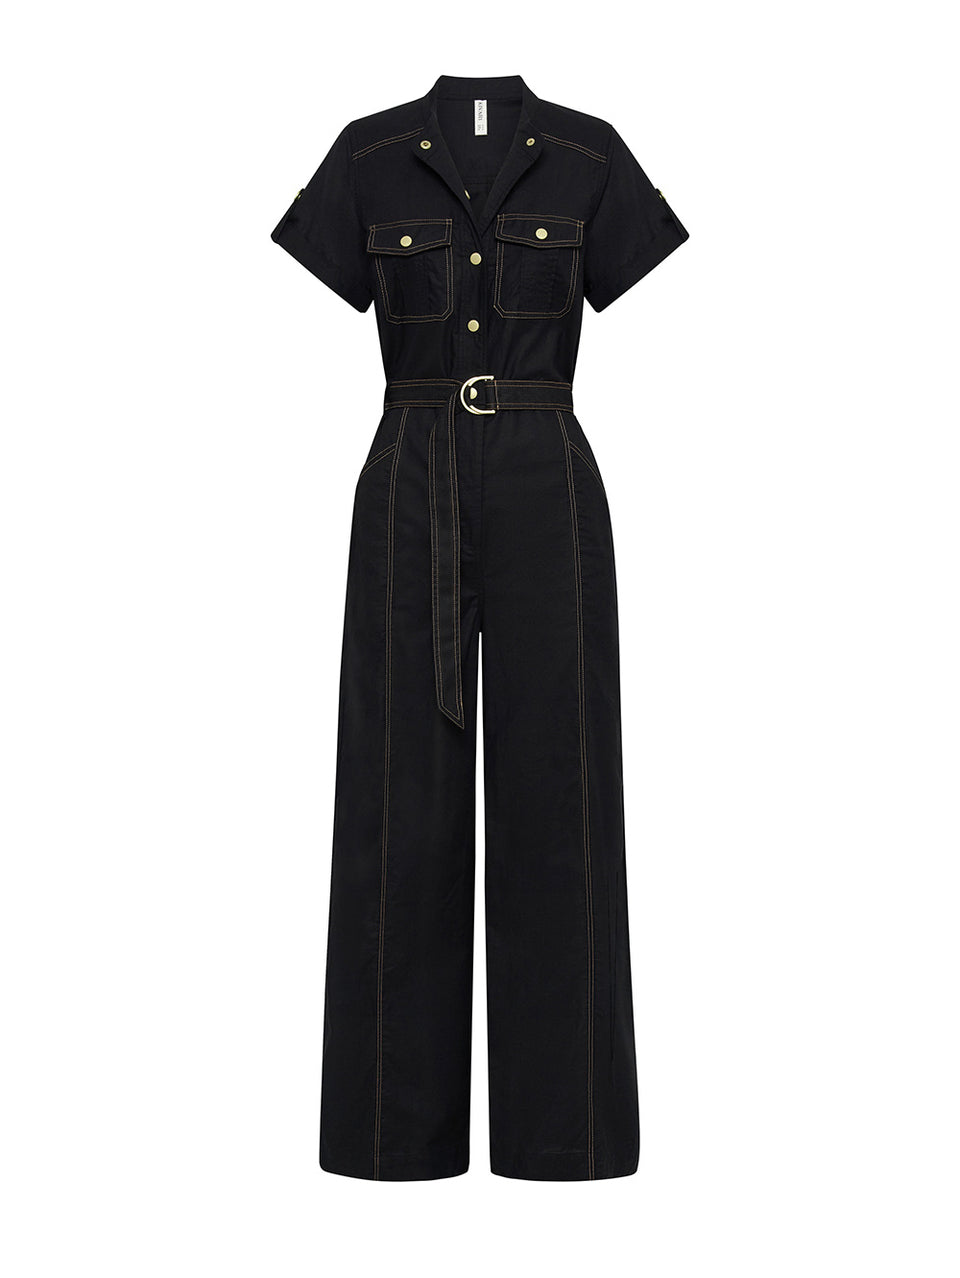 Ghost image of our KIVARI Ebony Jumpsuit: a black linen jumpsuit with gold buttons, topstitch details, a button-front with signature hardware and belt.